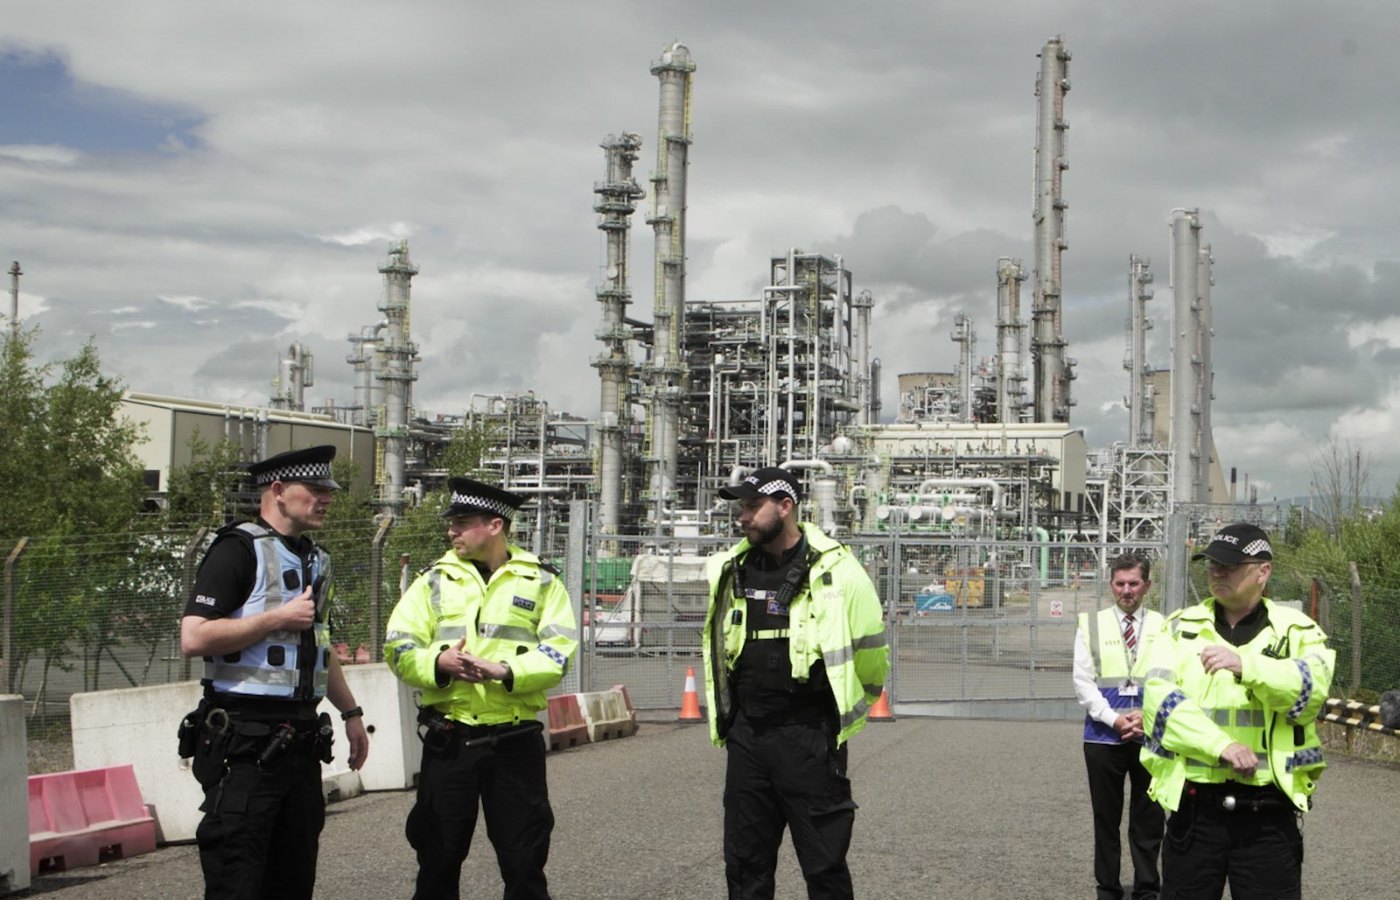 Police stood at the entrance of Ineos' Grangemouth oil refinery as protestors approached